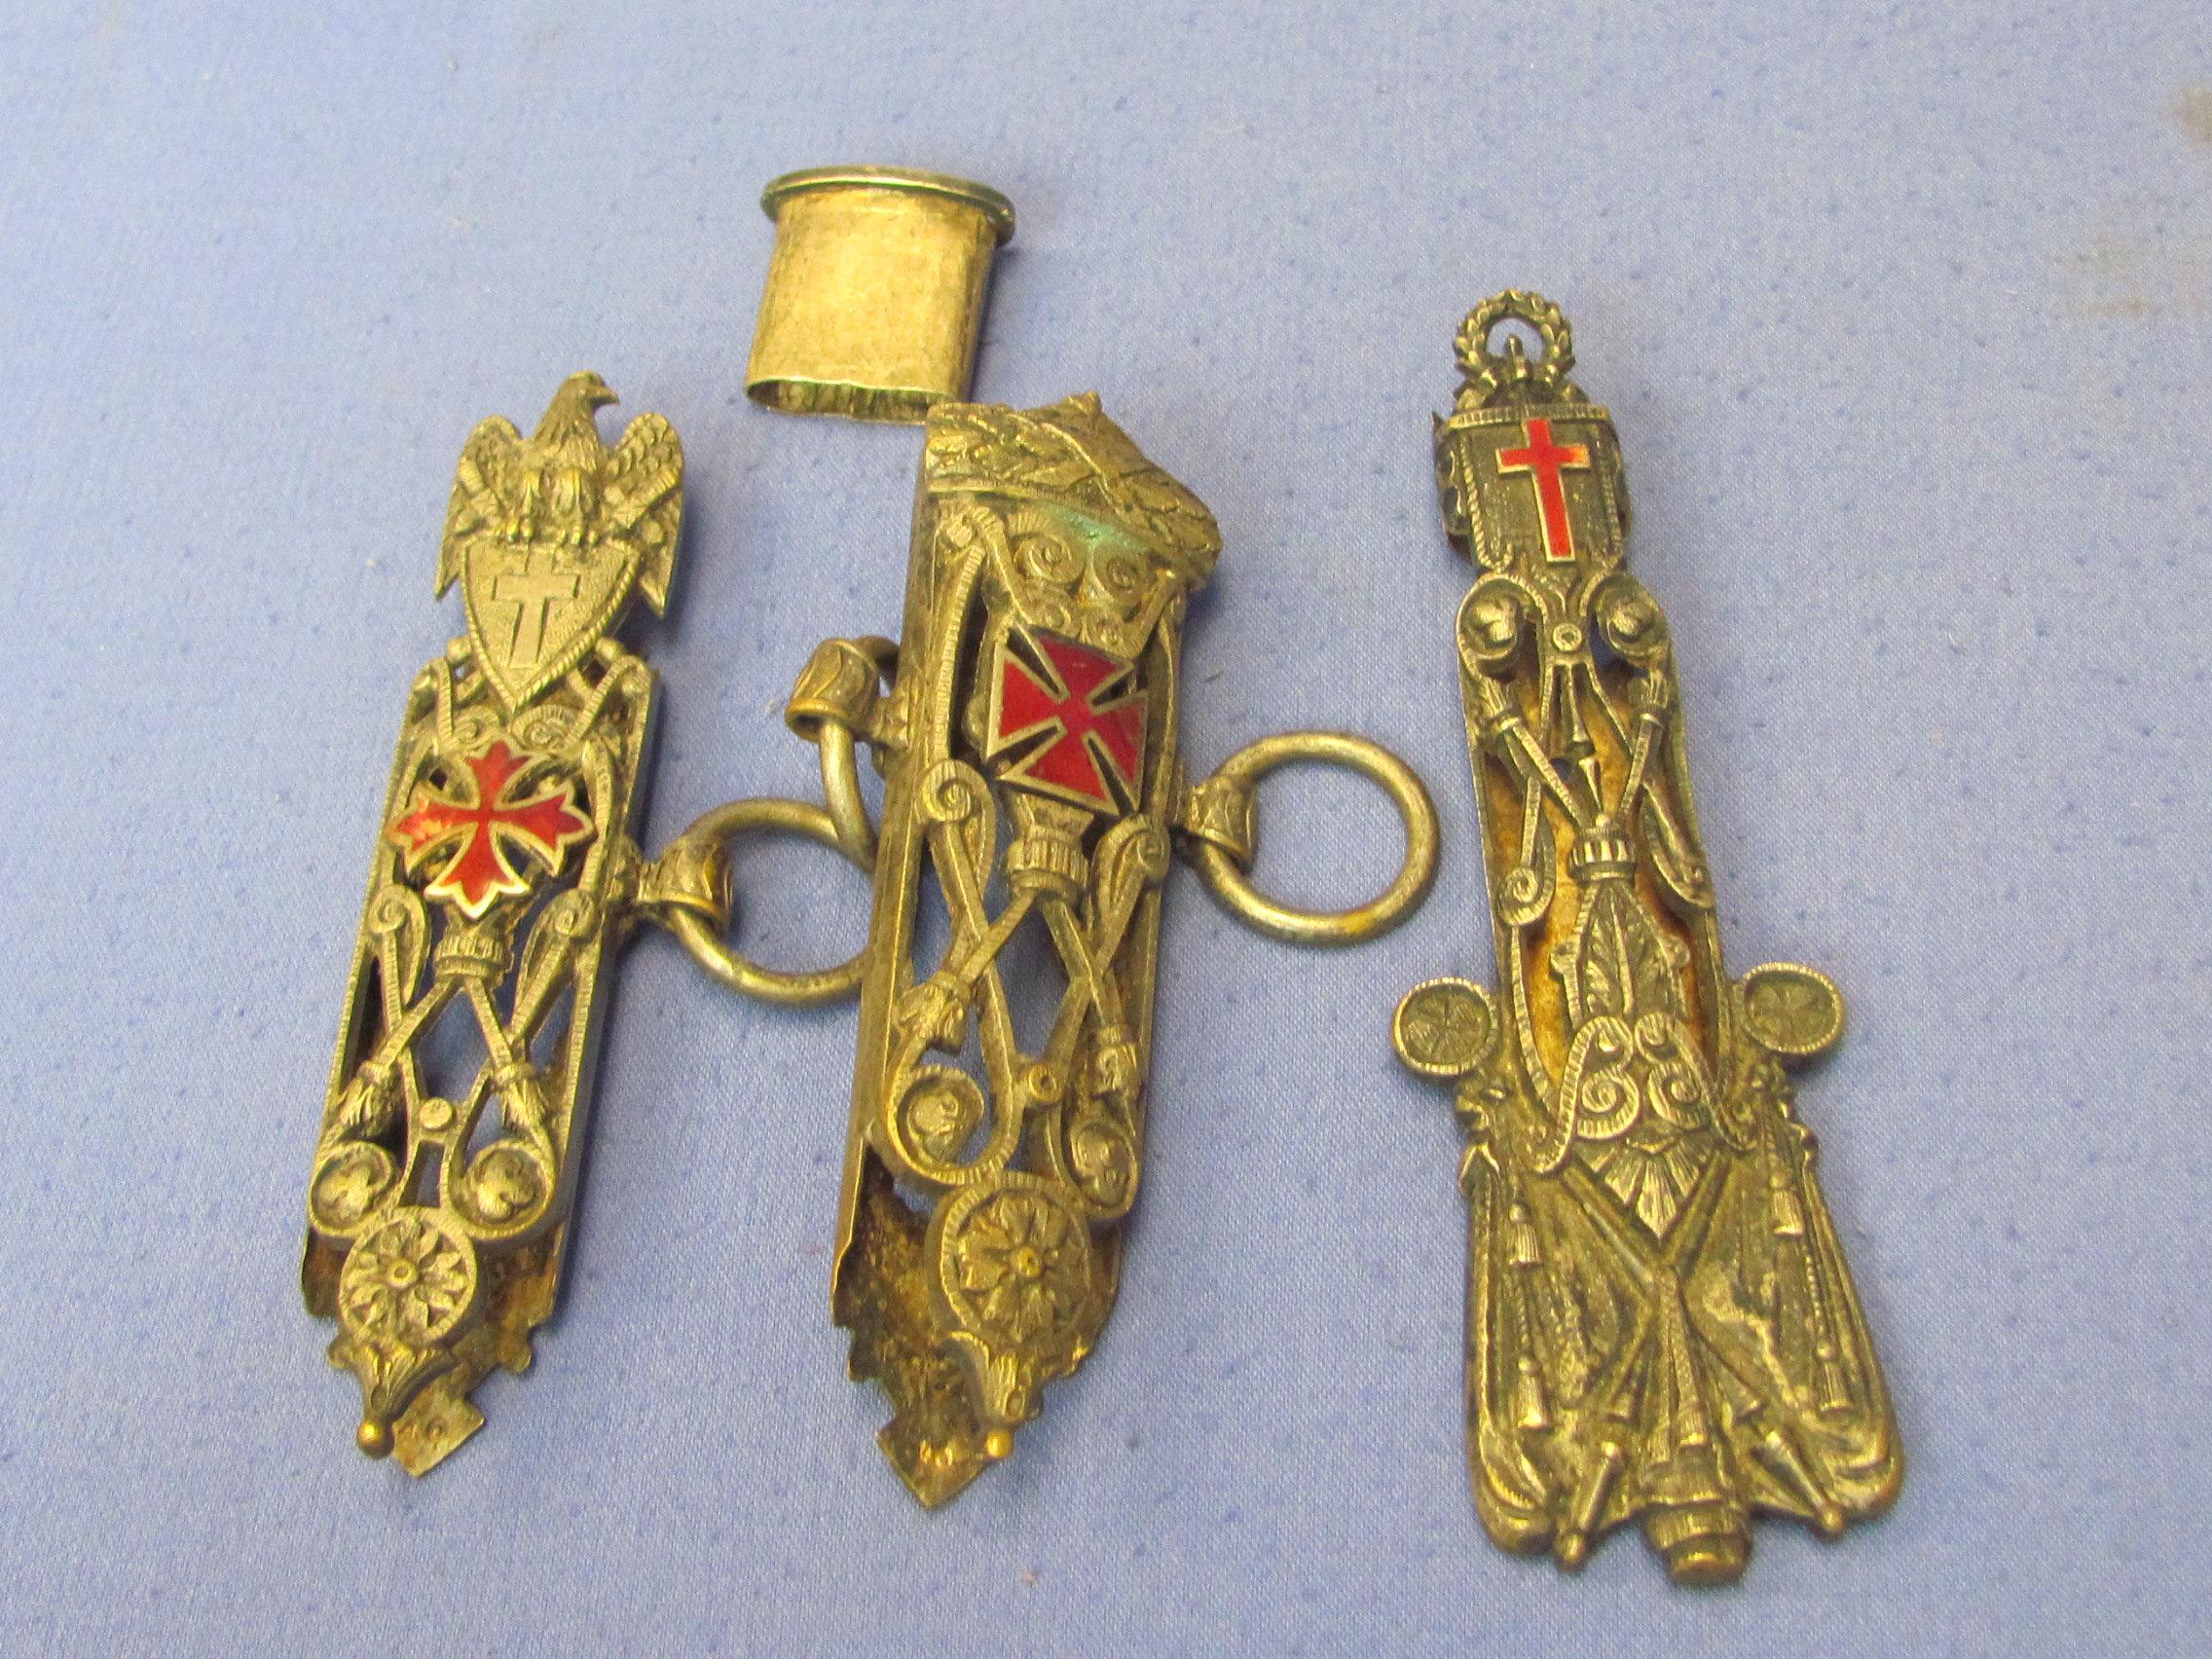 Parts for Sword Scabbard – Eagle & Cross – Maltese Cross – Silver-plated Brass?